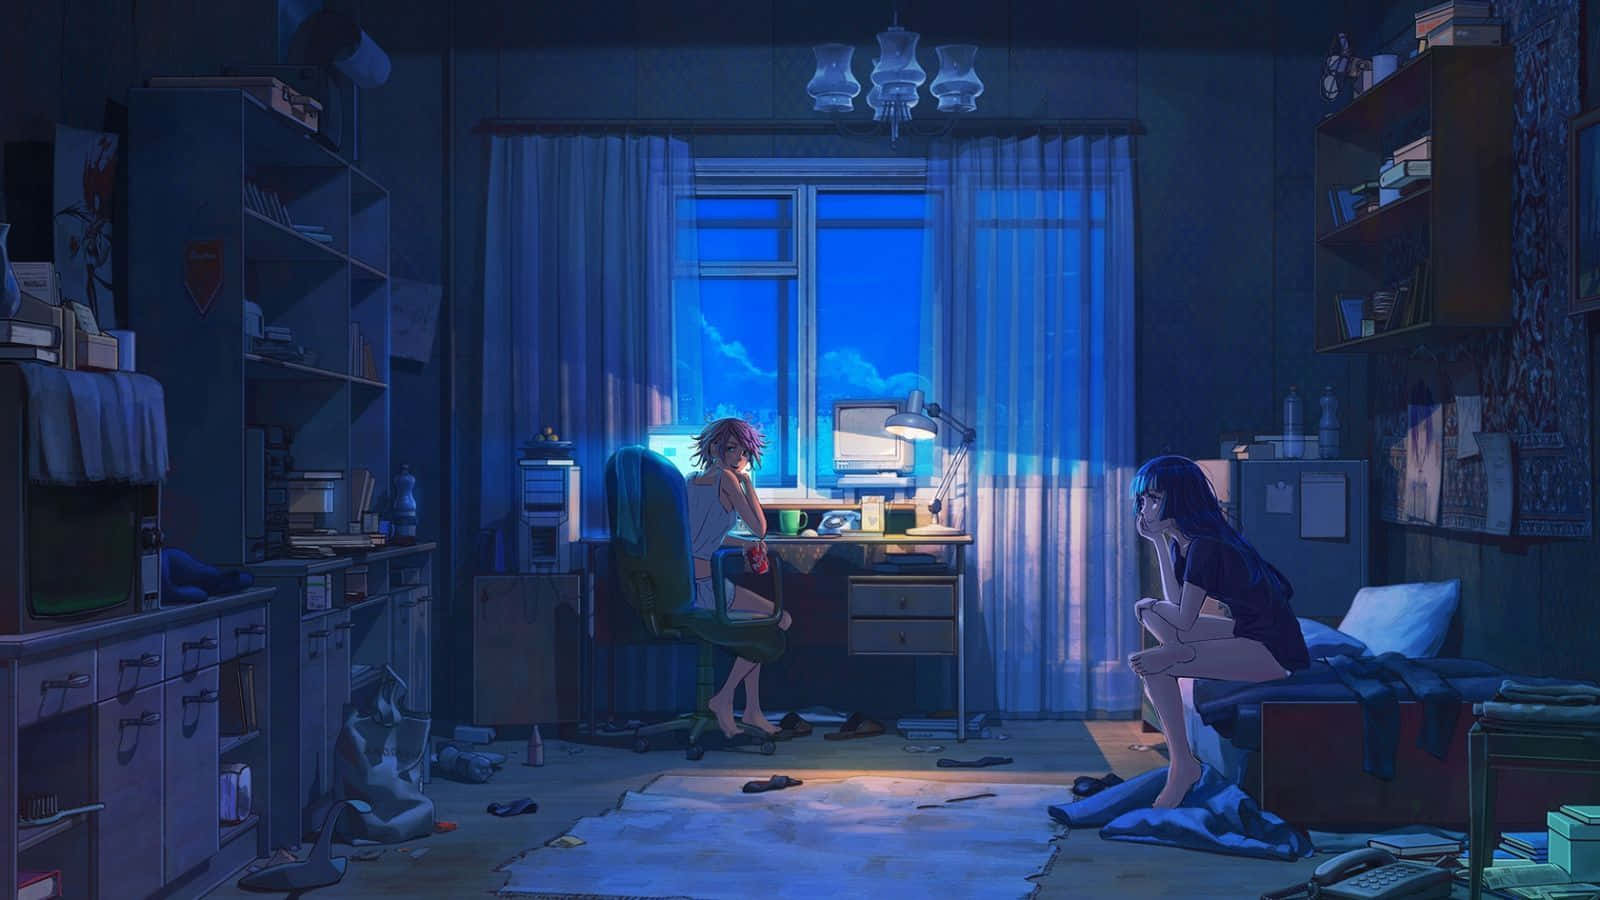 A Girl Sitting In A Room With A Computer